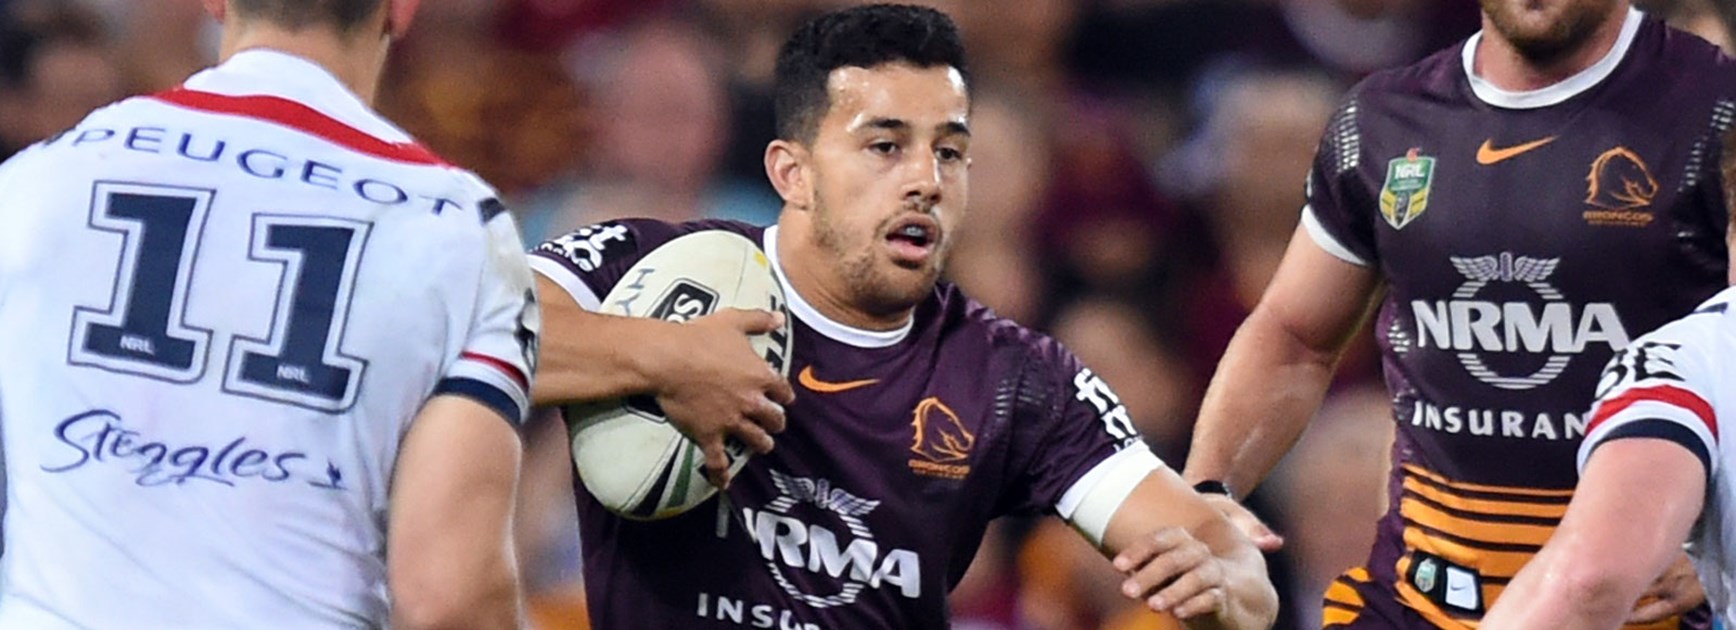 Broncos winger Jordan Kahu scored two tries against the Roosters.